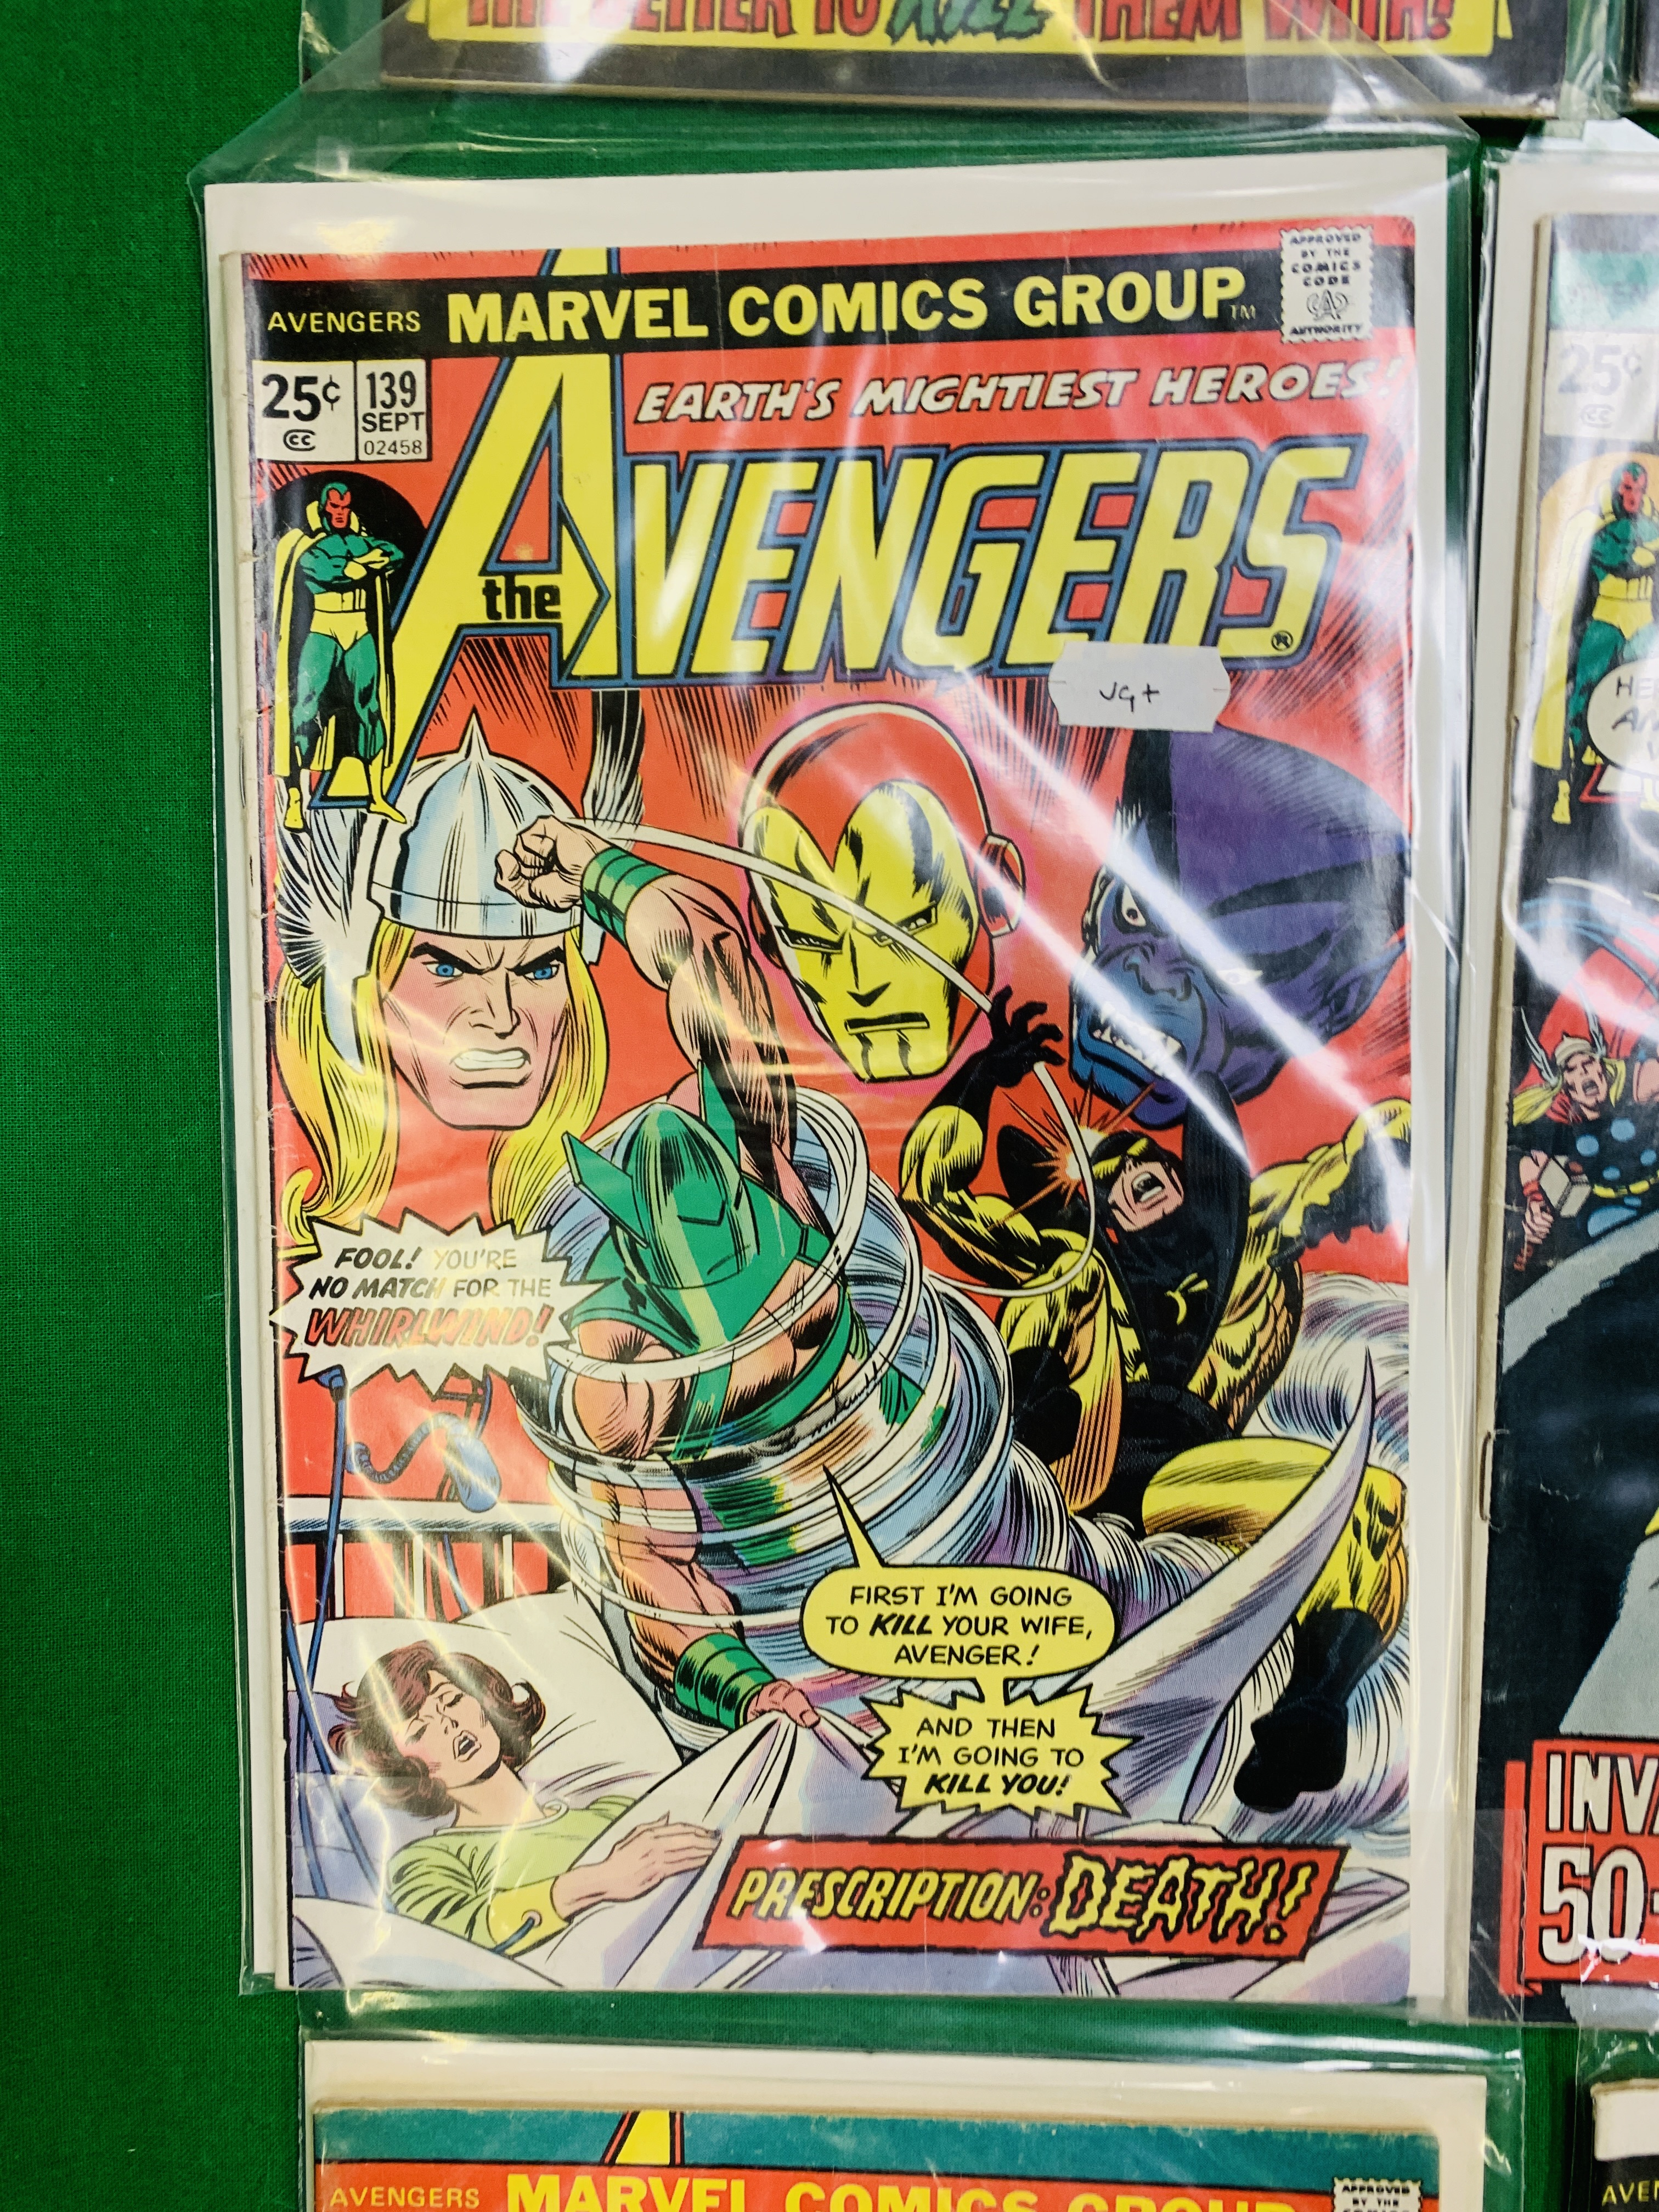 MARVEL COMICS THE AVENGERS NO. 101 - 299, MISSING ISSUES 103 AND 110. - Image 25 of 130